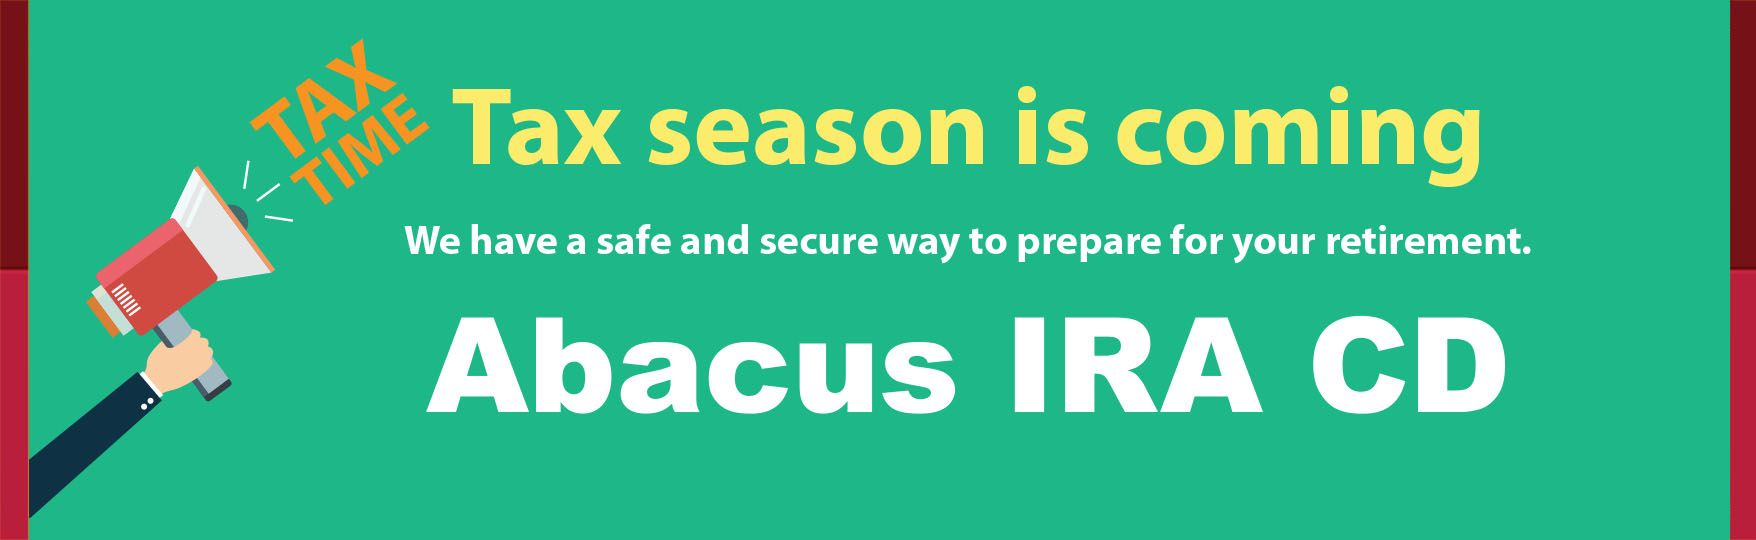 Tax season is coming. We have a safe and secure way  to prepare for your retirement. Abacus IRA CD